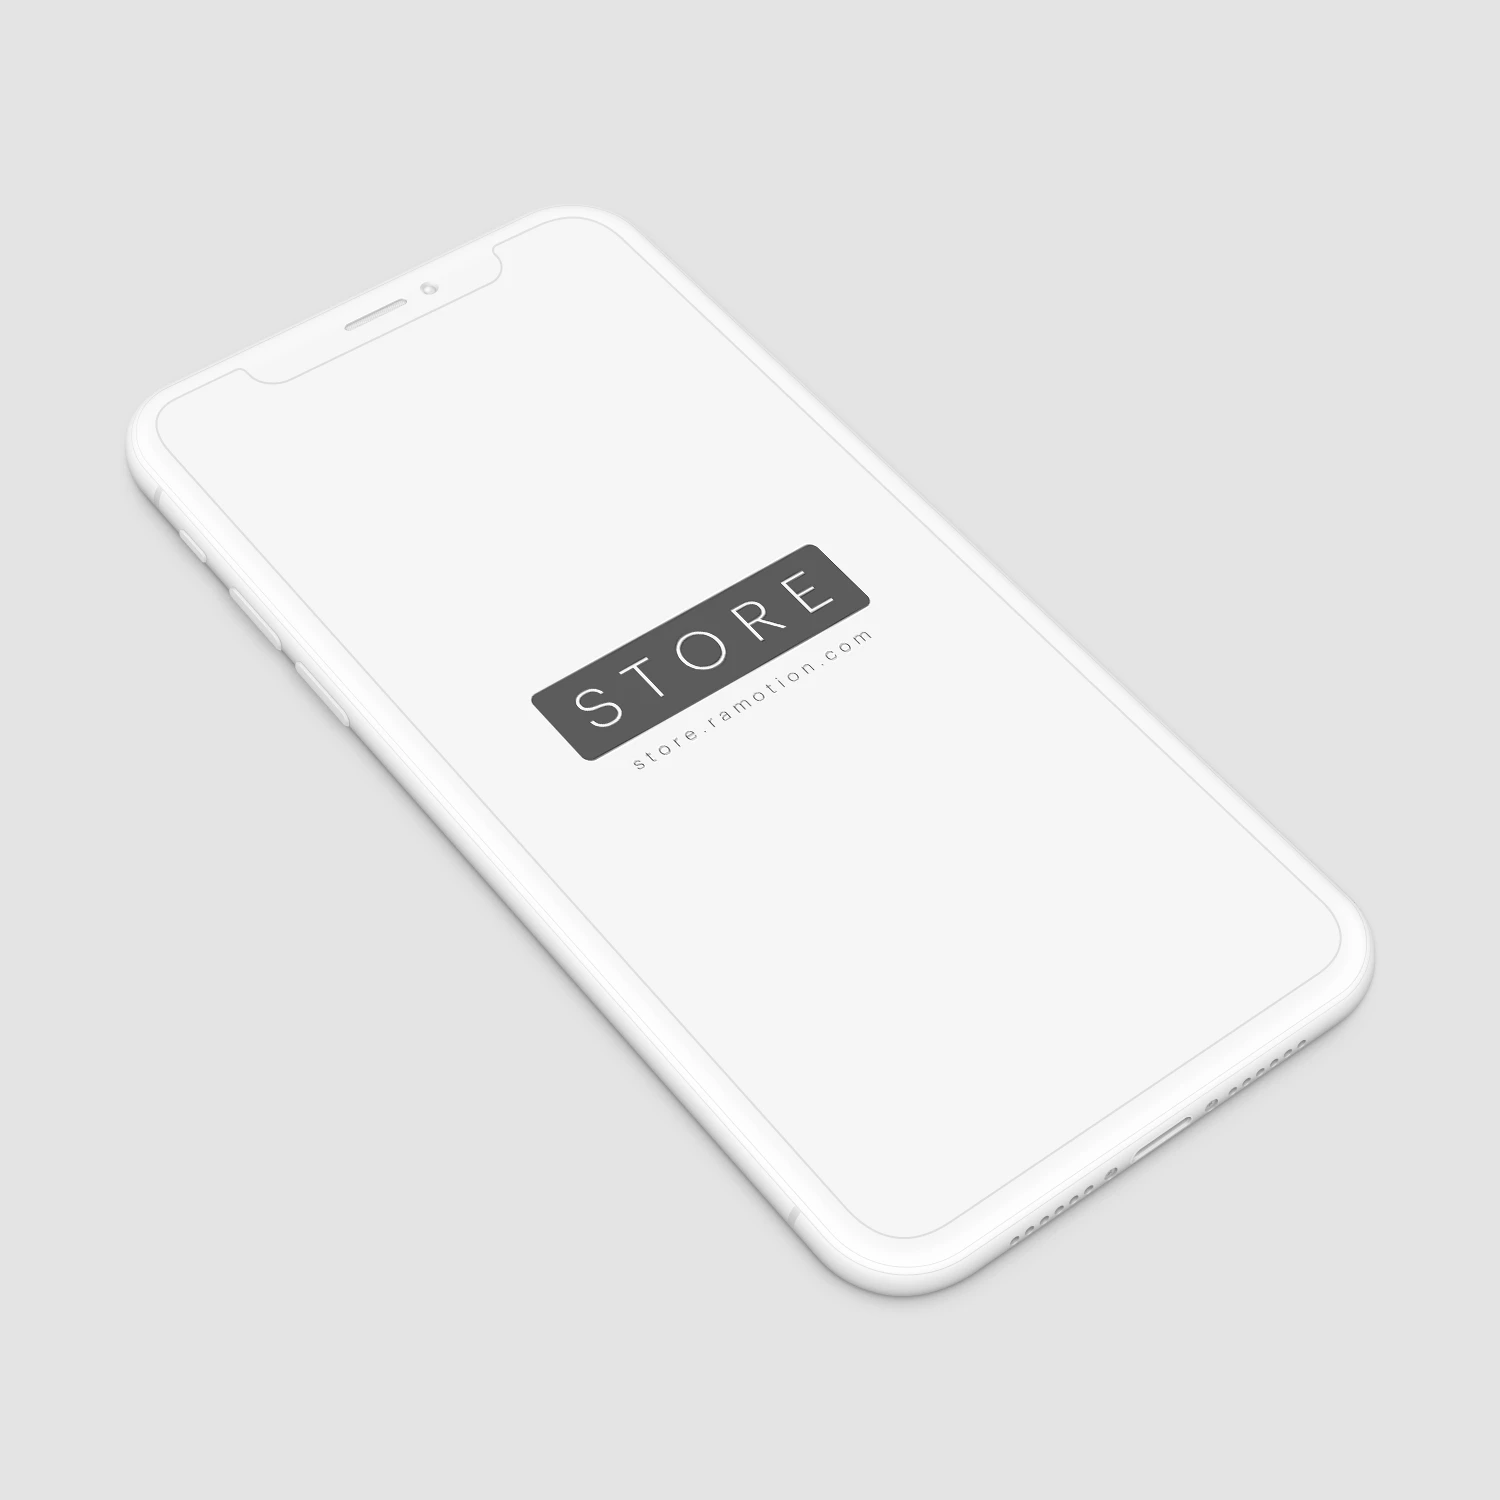 iPhone X Clay - White Perspective Mockup by Ramotion